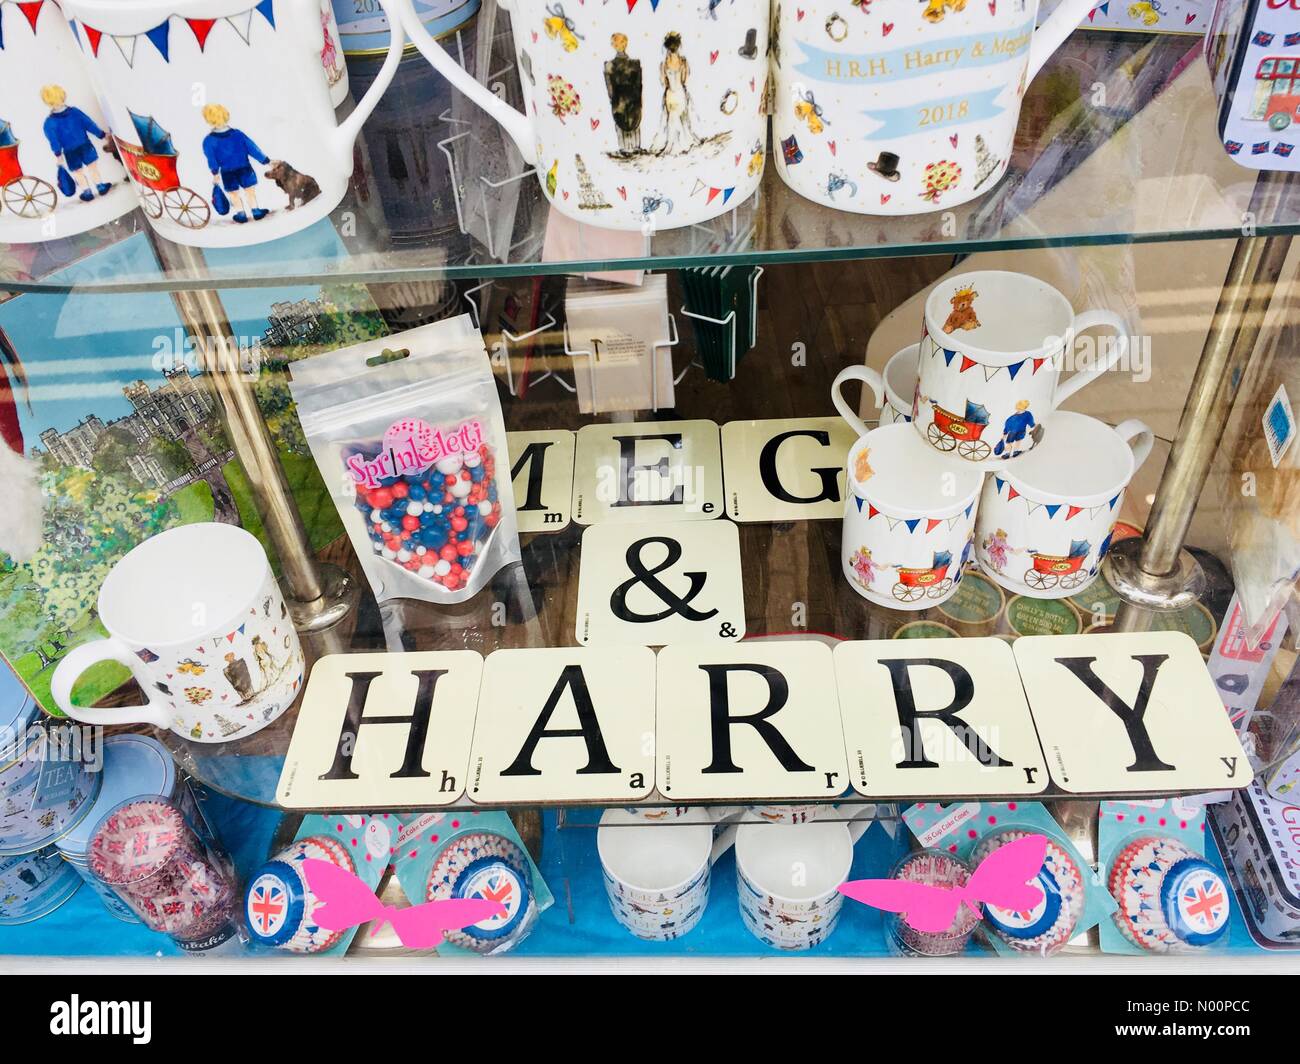 Richmond Upon Thames UK, 12th May 2018. A window display of Royal Wedding keepsakes and novelty items for sale including mugs, tea, biscuits, tote bags and cupcake liners. Credit: Lisa Werner/StockimoNews/Alamy Live News Stock Photo